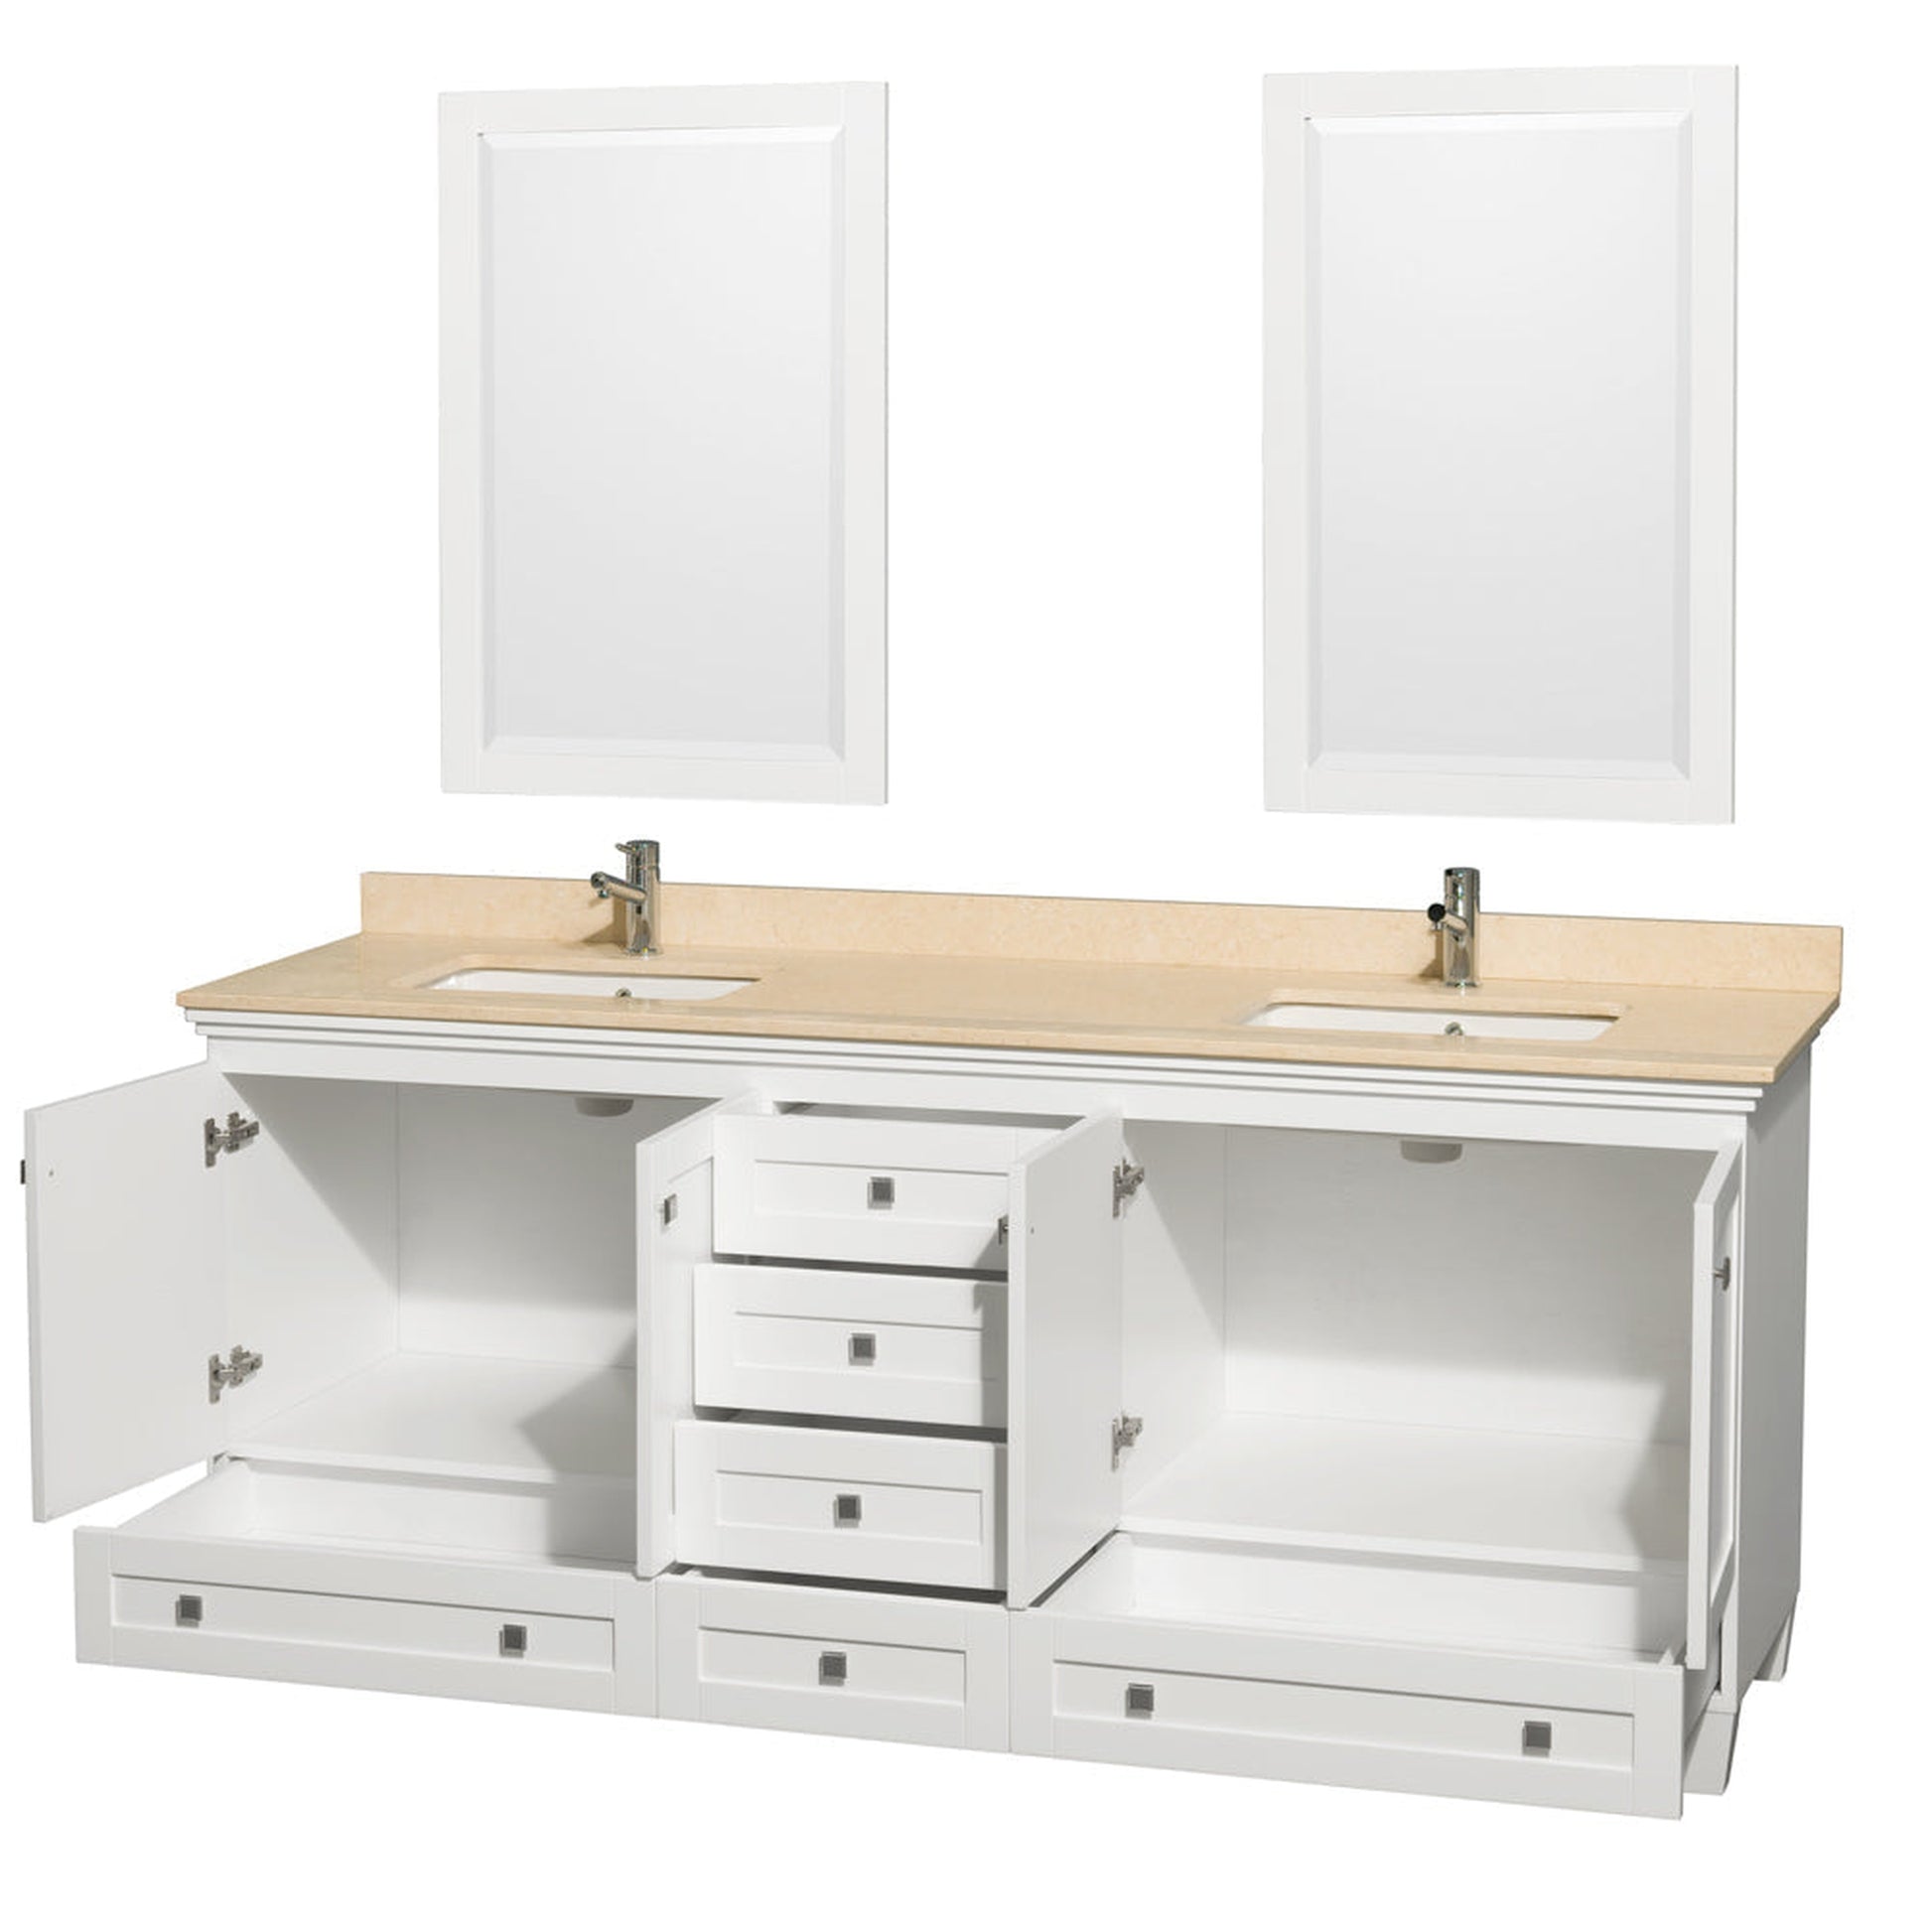 Wyndham Collection Acclaim 80" Double Bathroom Vanity in White With Ivory Marble Countertop, Undermount Square Sink & 24" Mirror